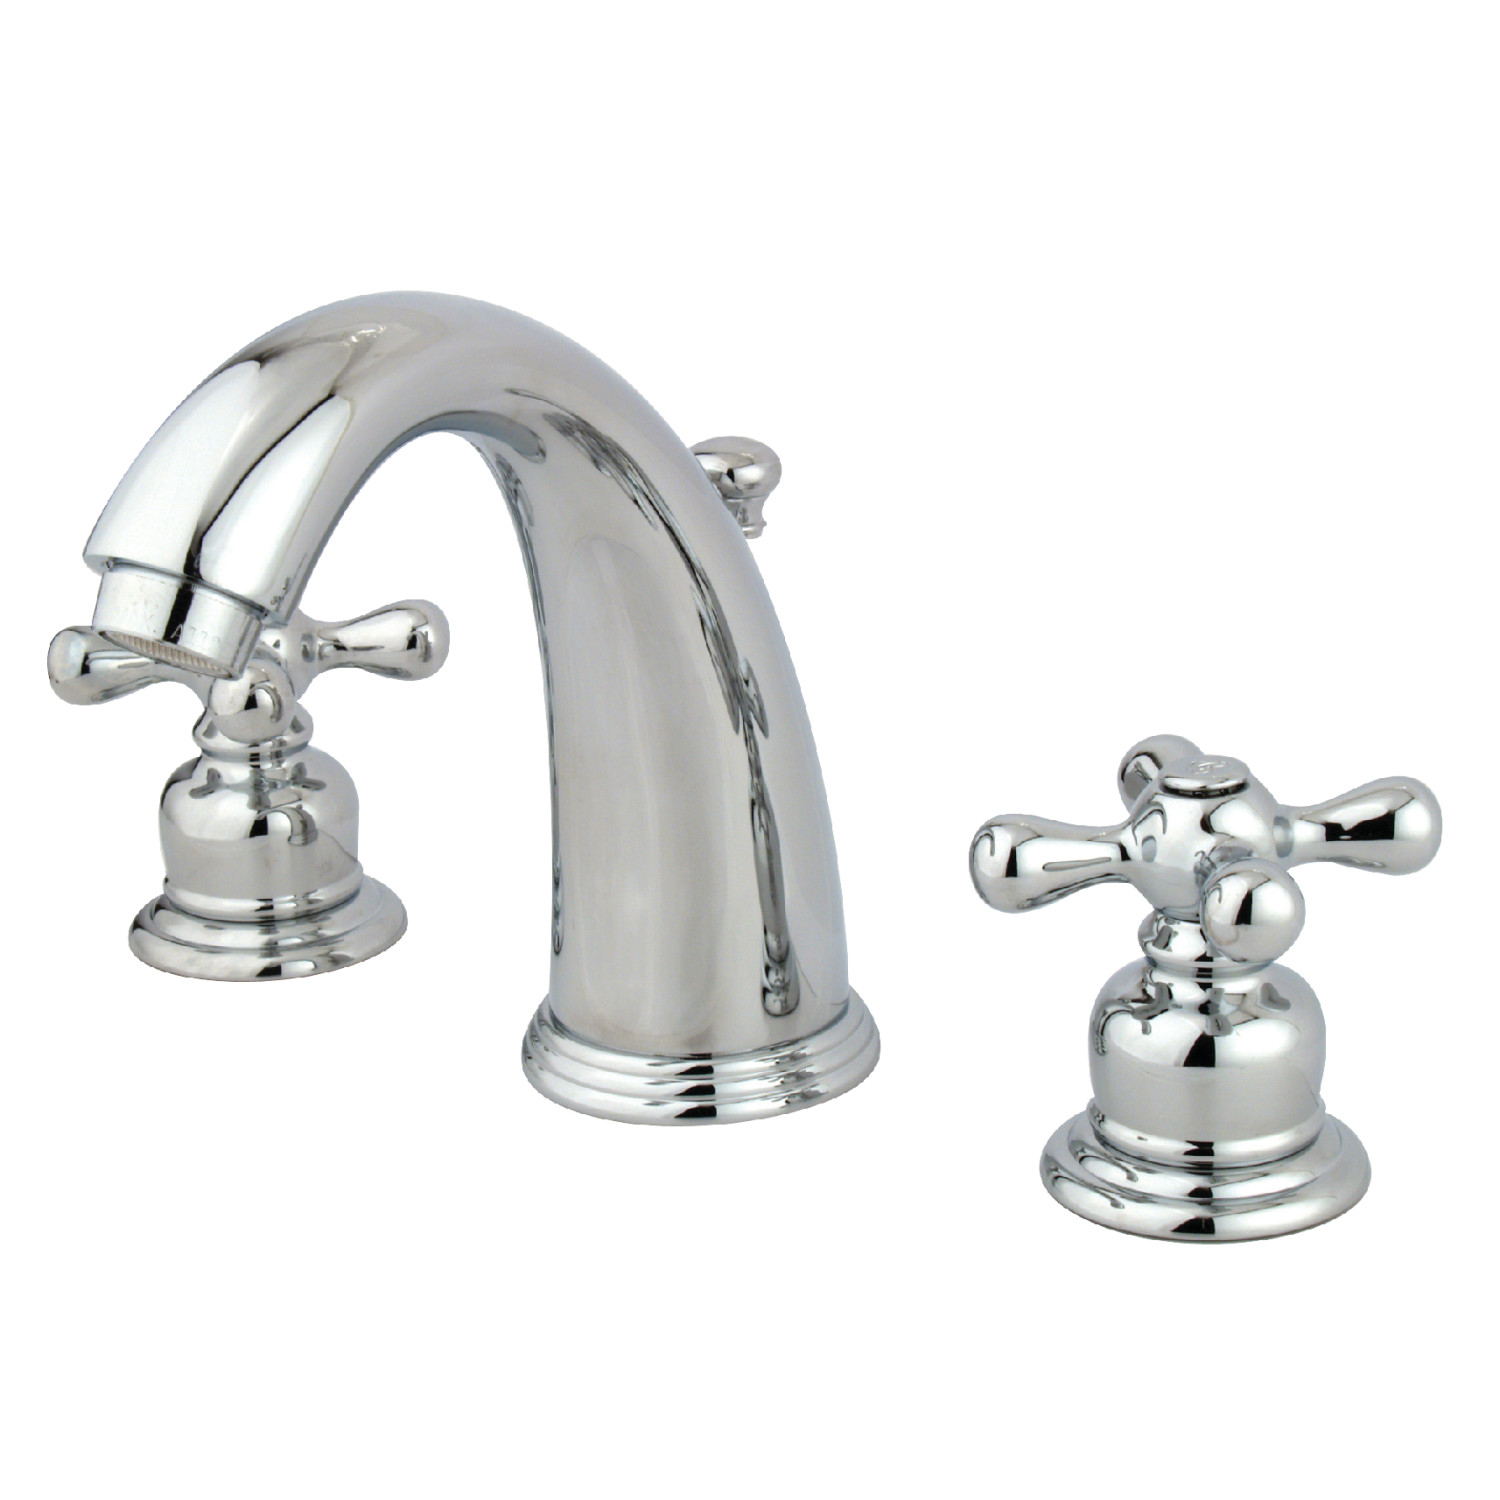 Vintage 2-Handle Three-Hole Deck Mounted Widespread Bathroom Faucet in Polished Chrome